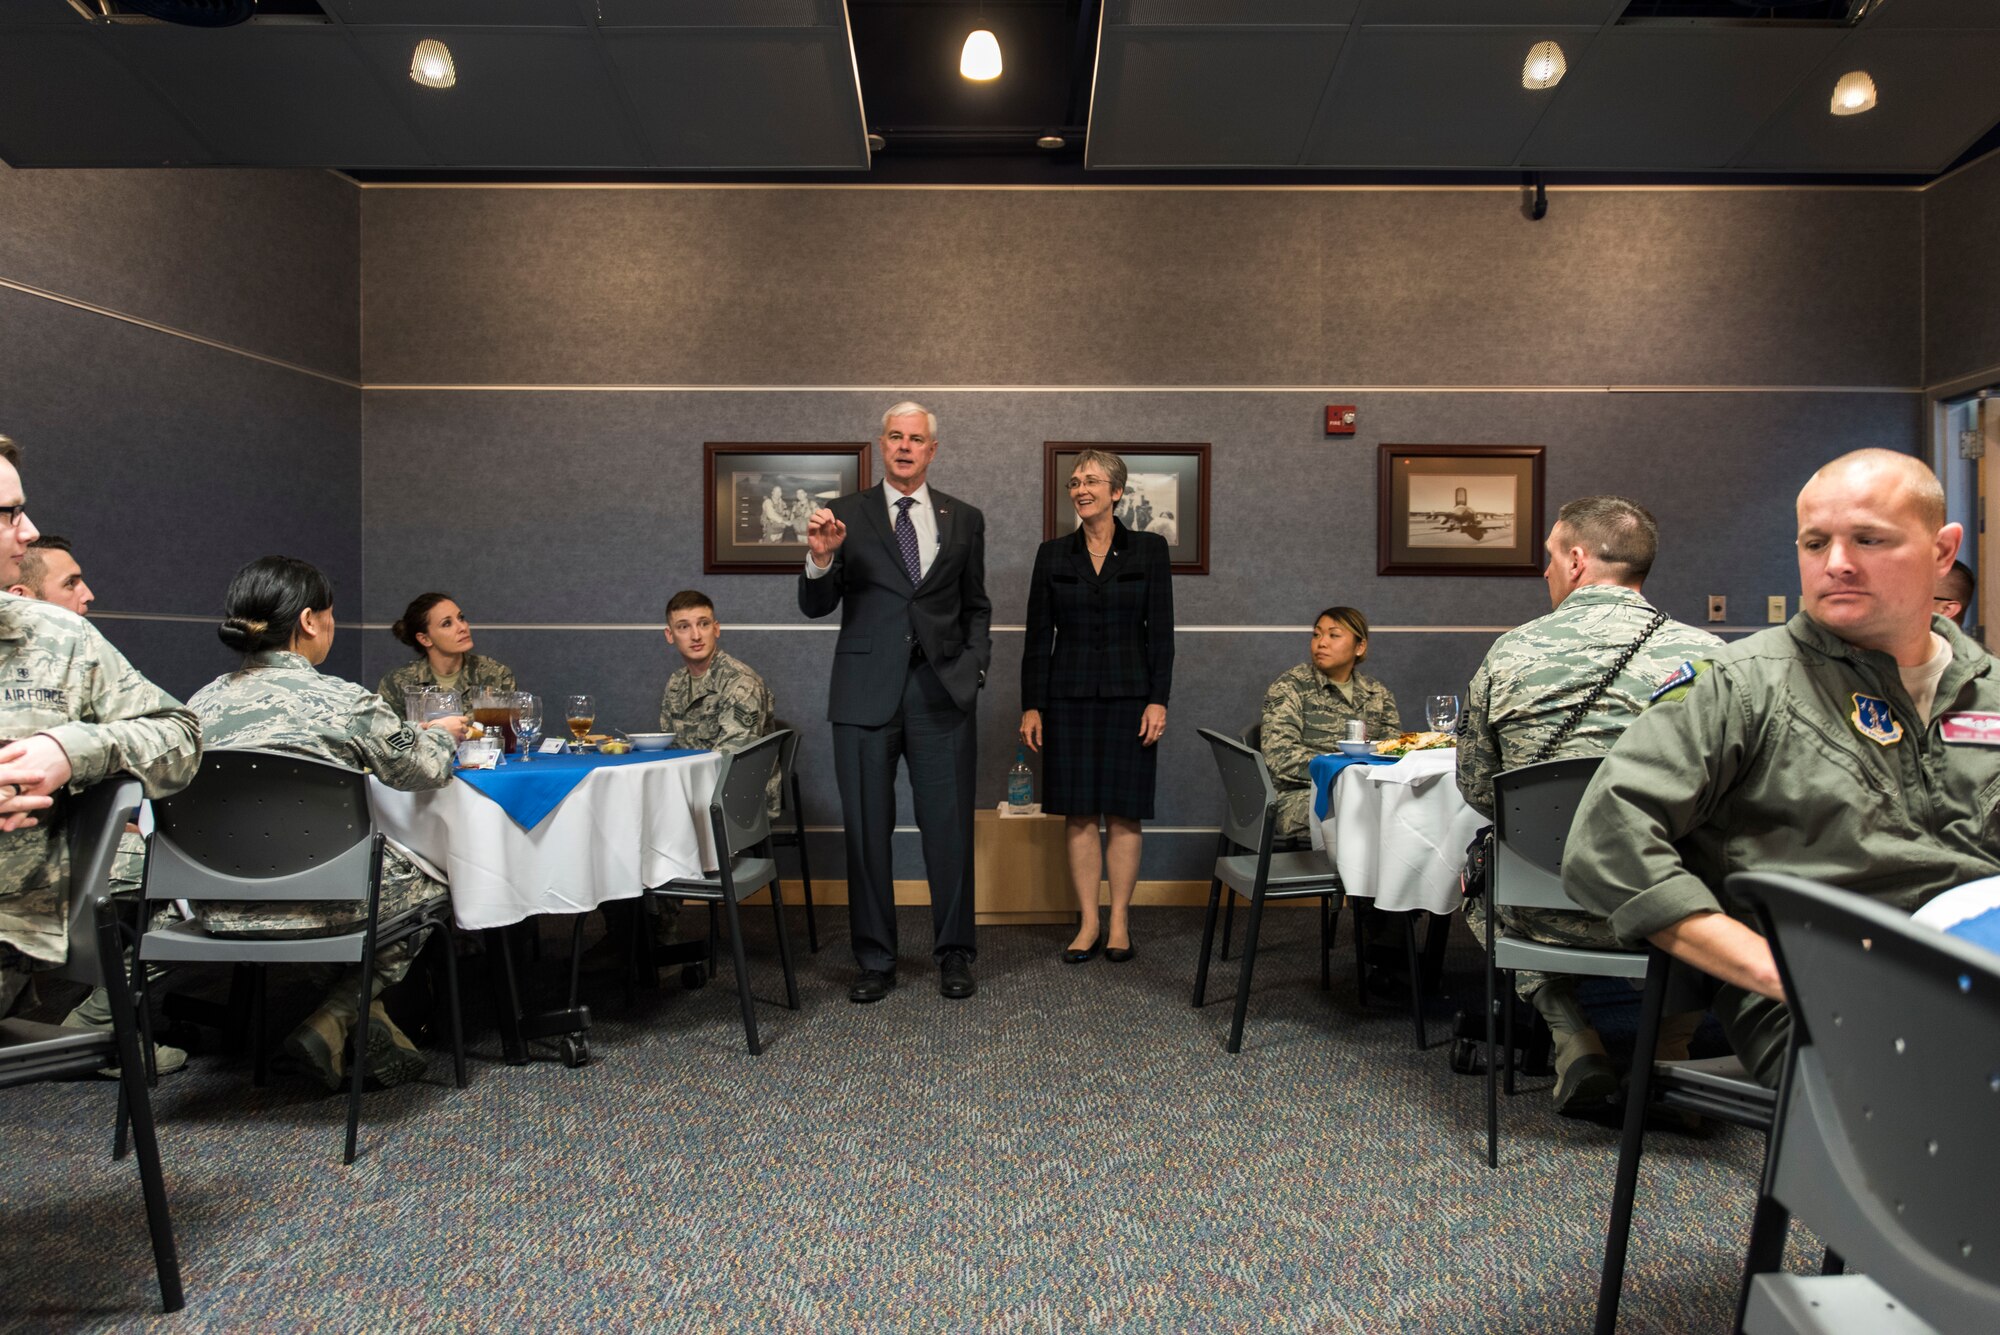 Congressman Steve Womack (left) and Secretary of the Air Force Heather Wilson speak to airmen of the 188th Wing during a luncheon at Ebbing Air National Guard Base, Fort Smith, Ark., Mar. 26 , 2018.  Wilson’s visit to the 188th Wing marks her first tour of the wing's missions since becoming the SECAF. (U.S. Air National Guard photo by Senior Airman Matthew Matlock)